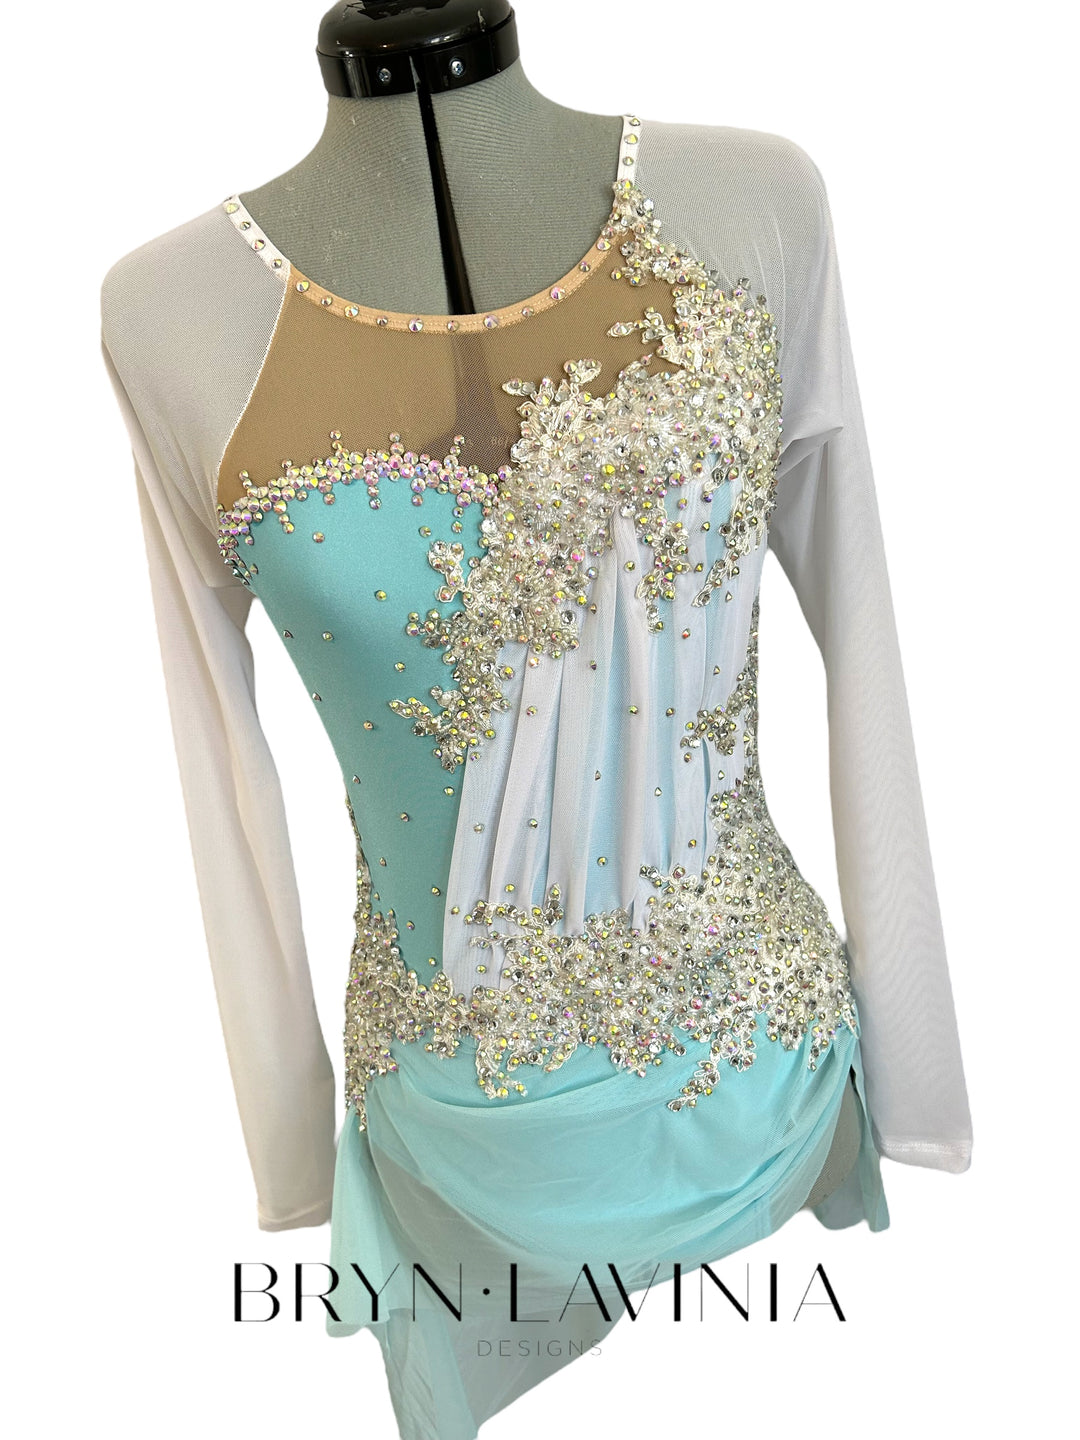 NEW Adult Small ice blue/white ready to ship costume